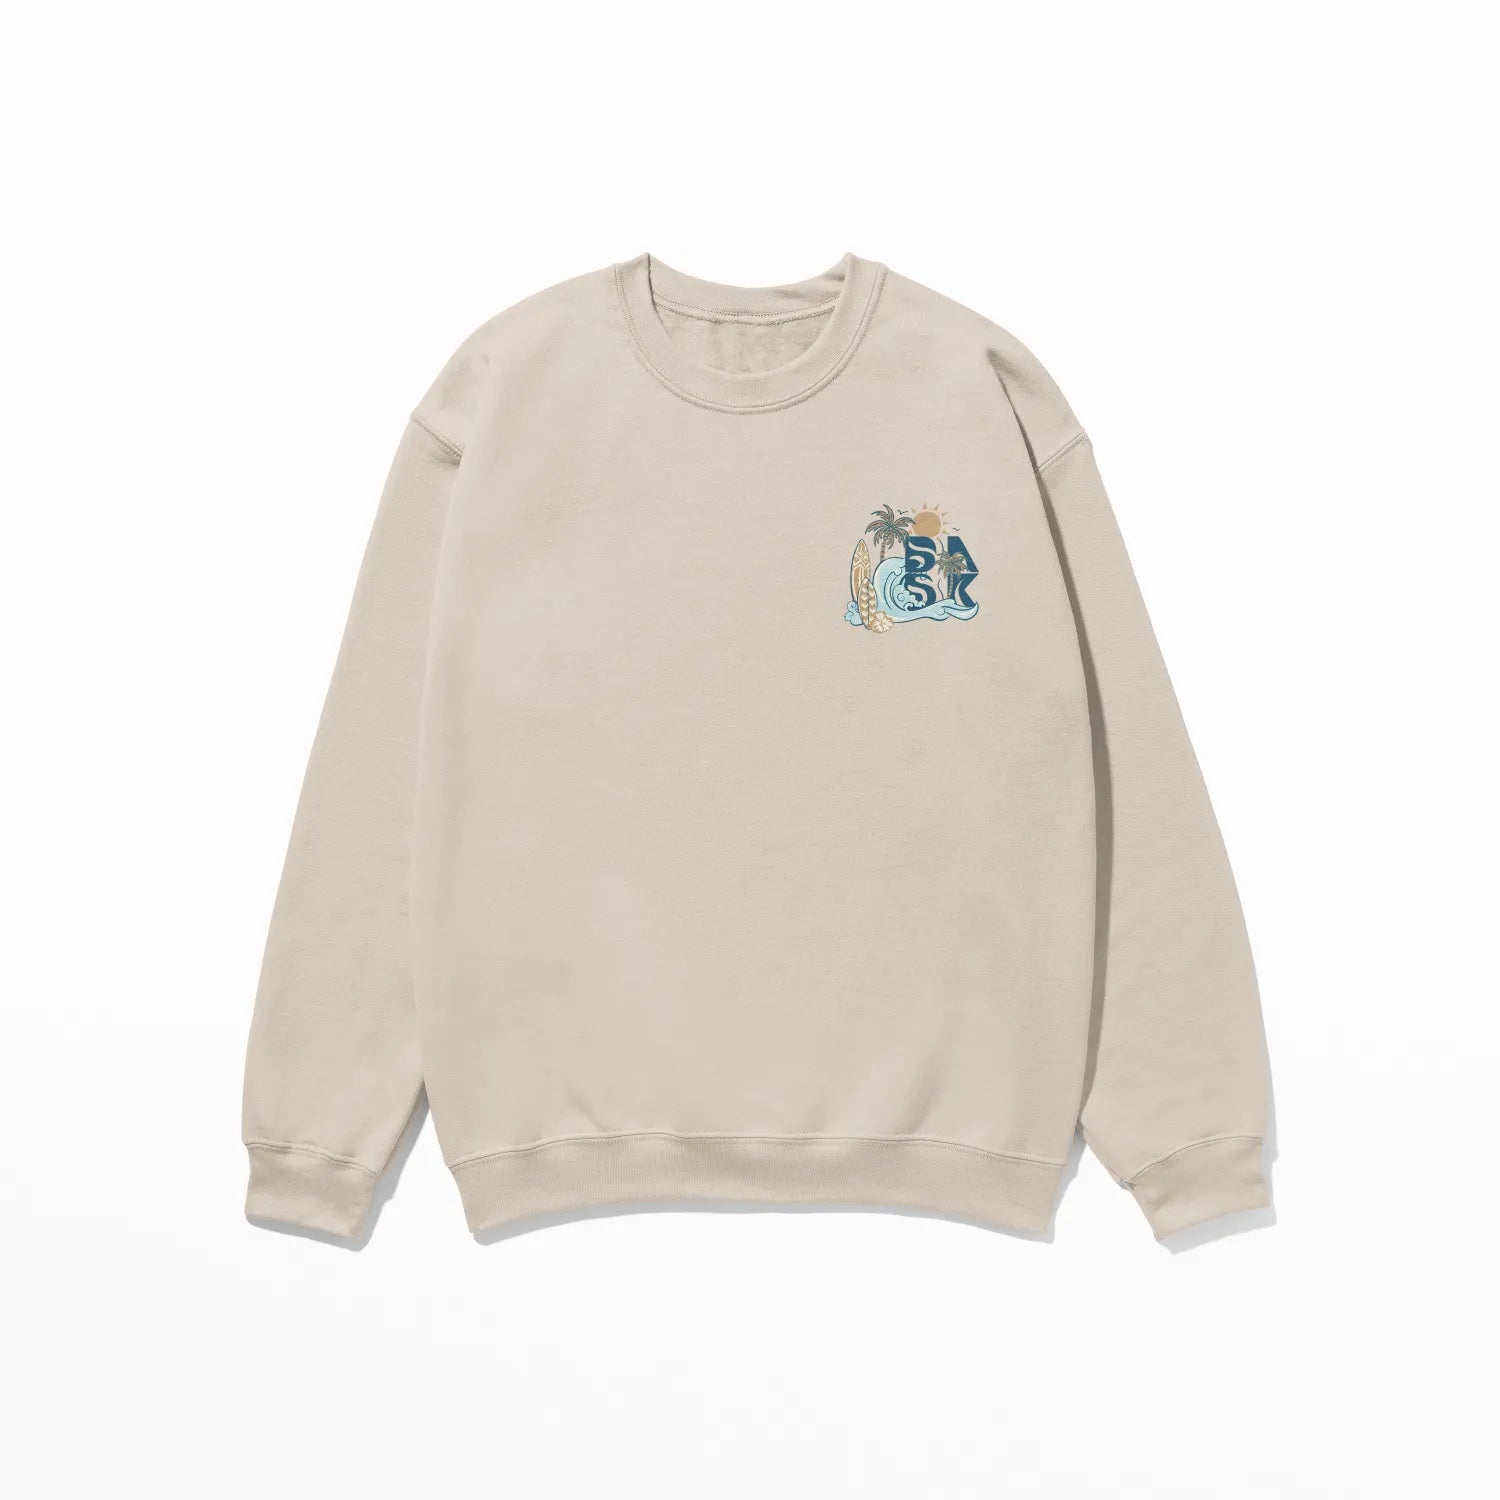 A beige Be Still and Know sweatshirt with a blue bird on it would be called the Nalu o ka Mana (Waves of Faith) Sweatshirt.